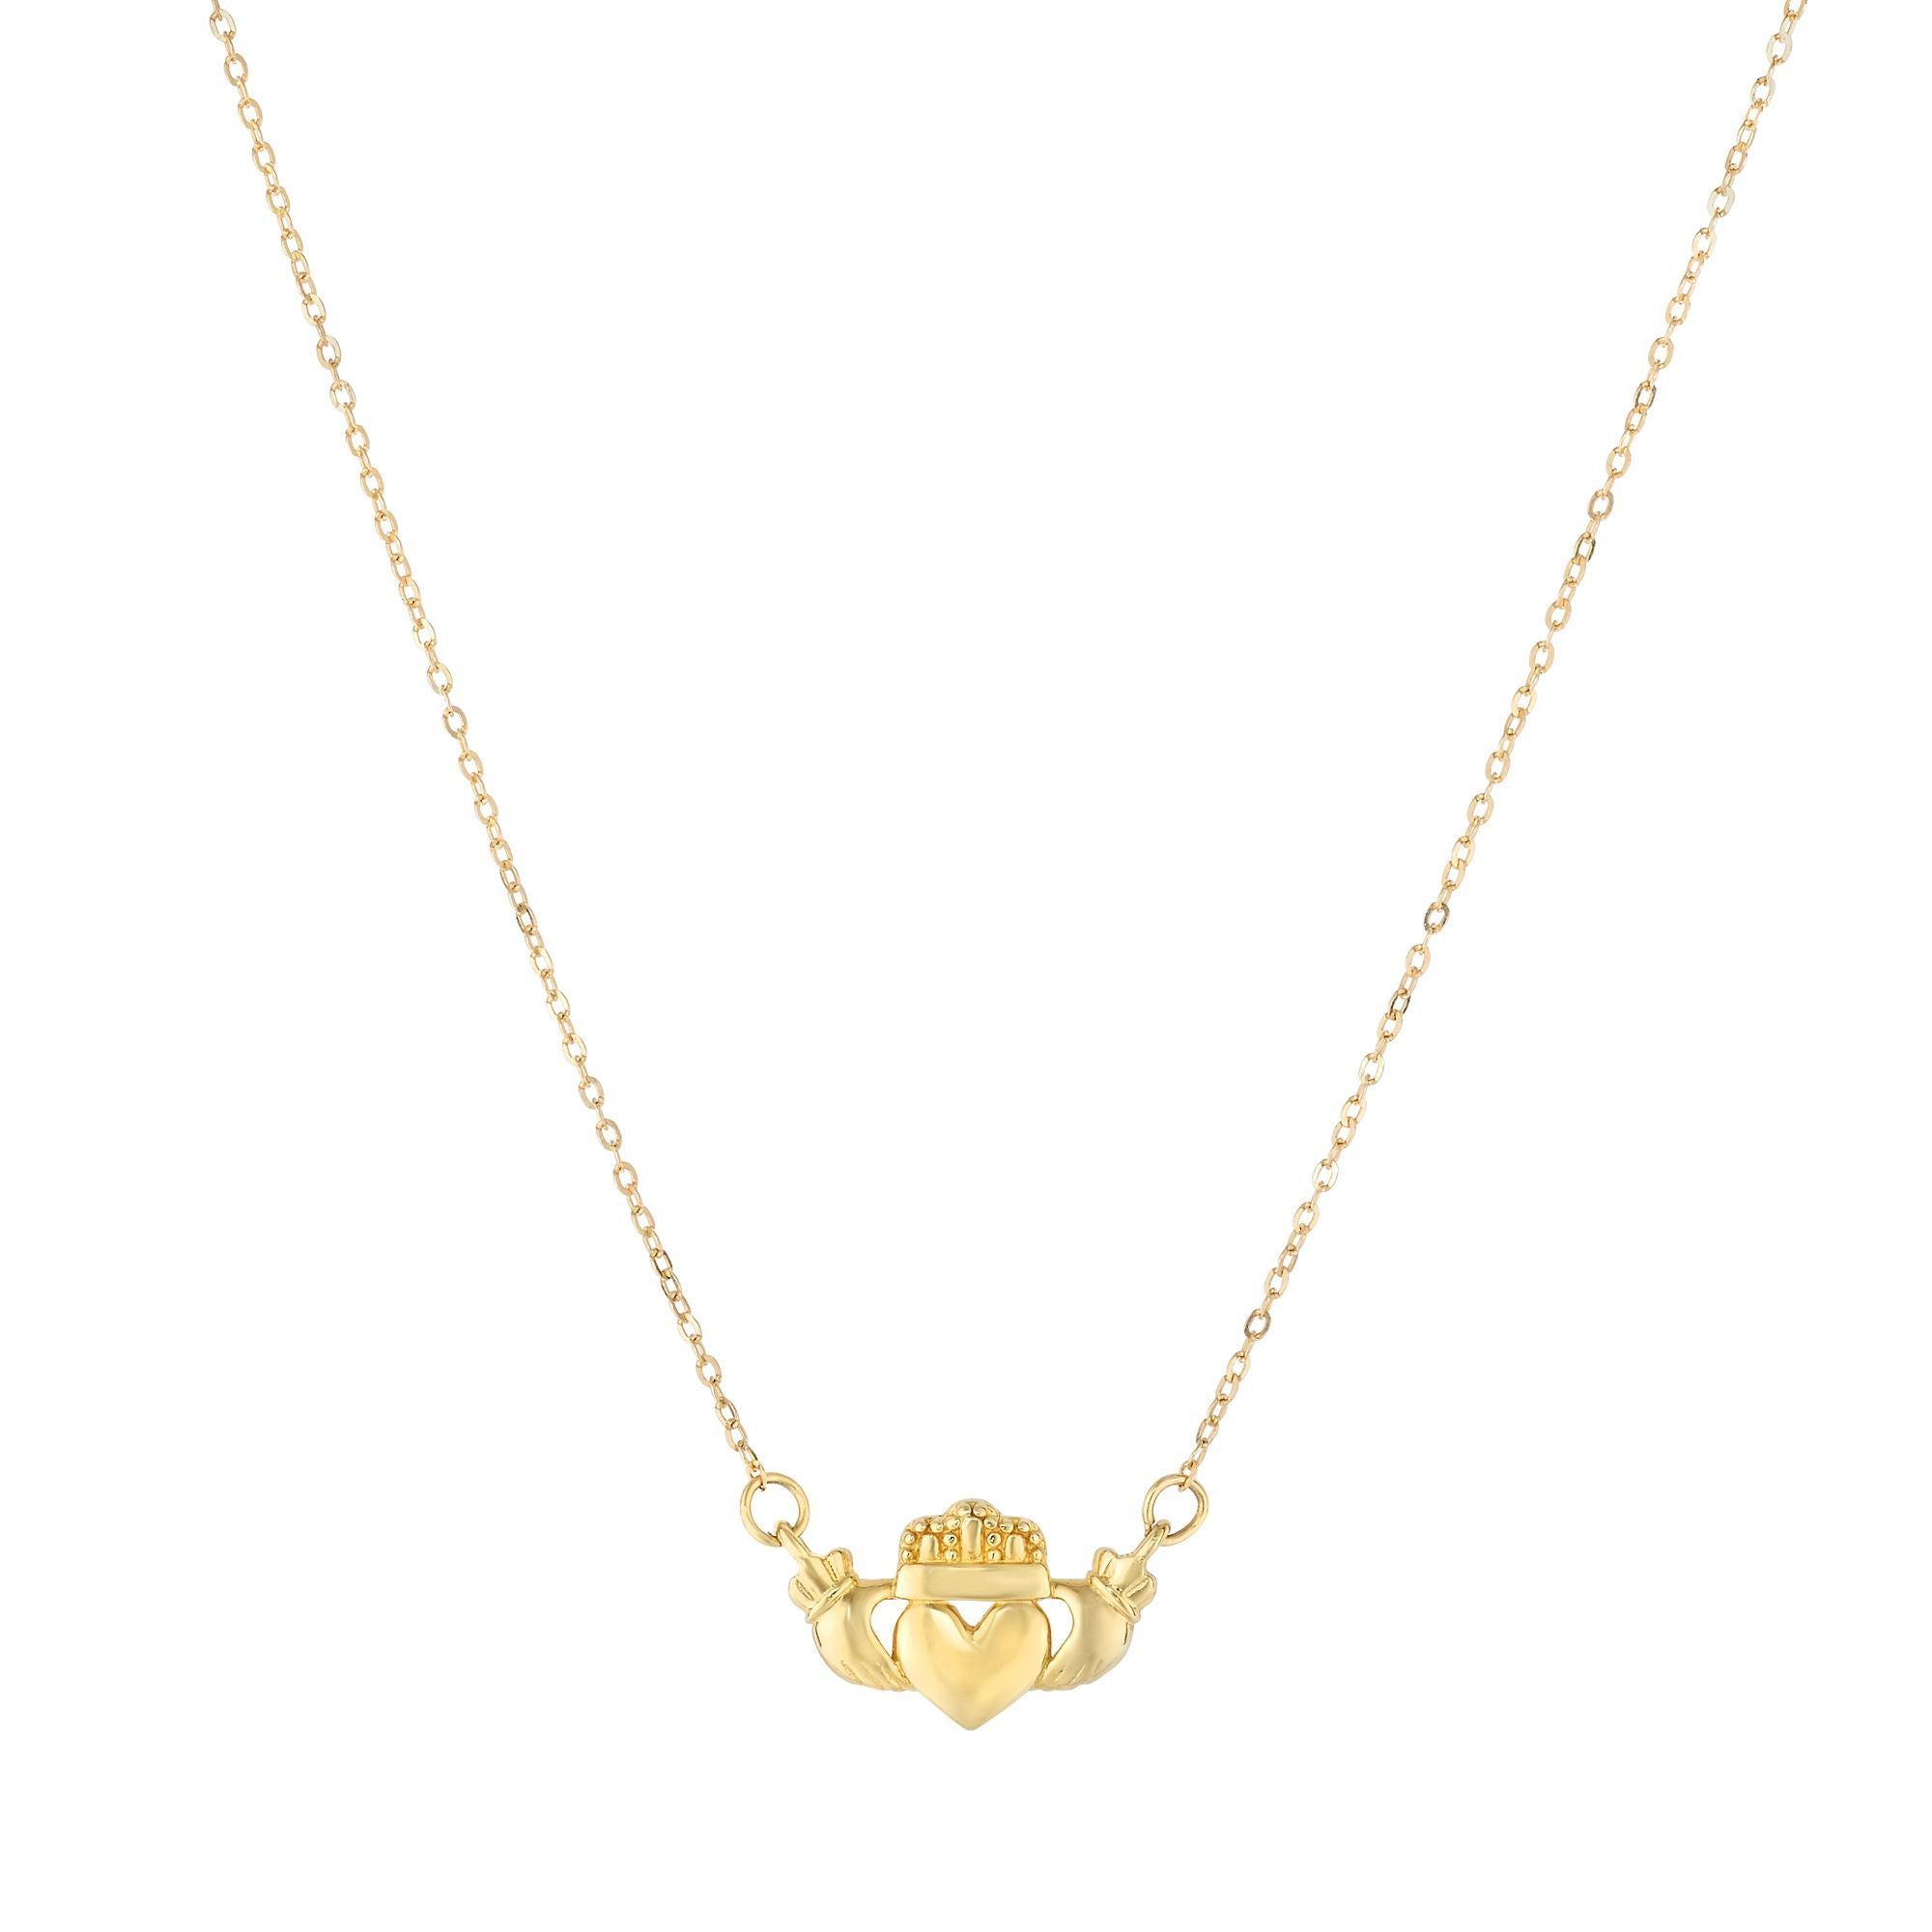 Minimalist Solid Gold Claddagh Necklace, Fainne Chladaigh Necklace - wingroupjewelry